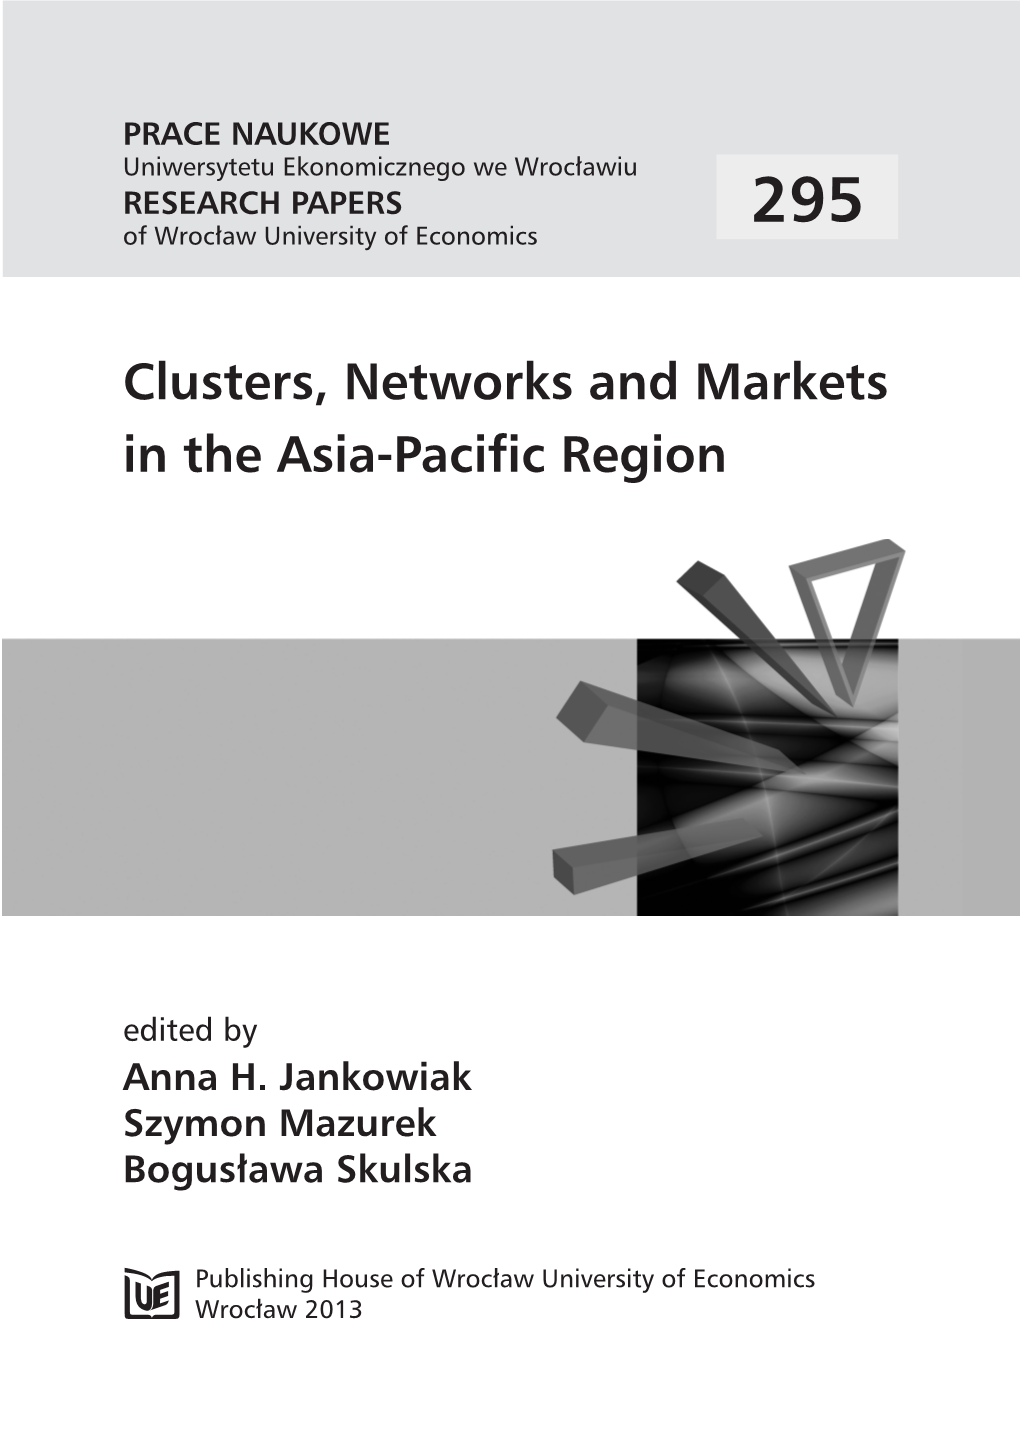 Clusters, Networks and Markets in the Asia-Pacific Region